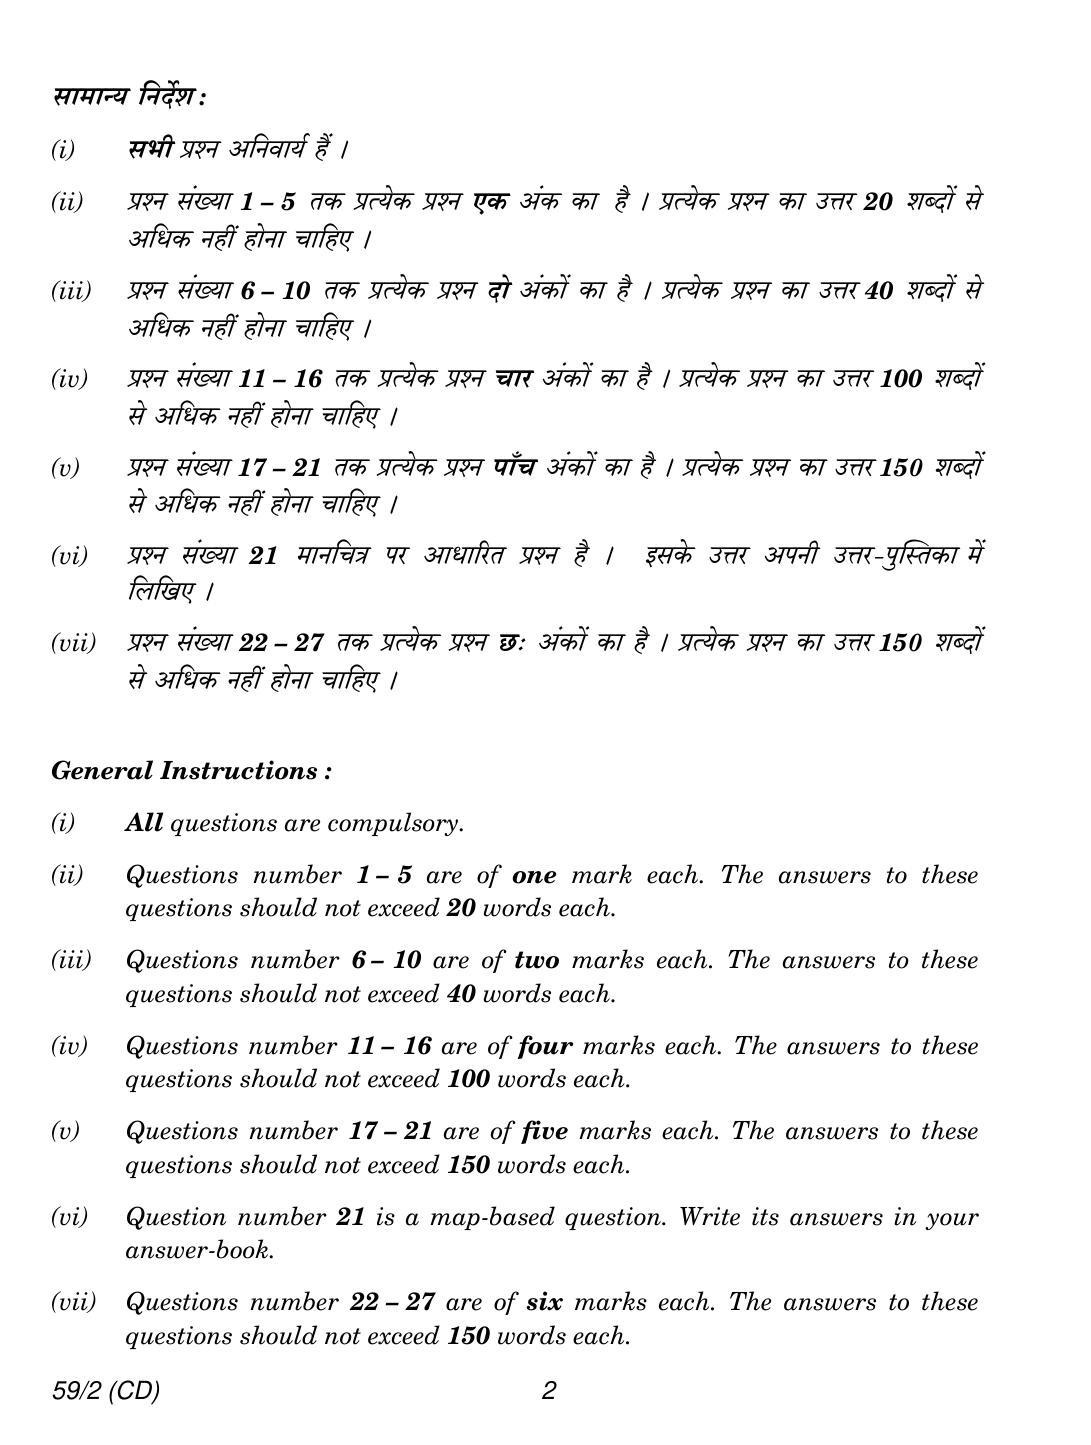 CBSE Class 12 59-2 POLITICAL SCIENCE CD 2018 Question Paper - Page 2